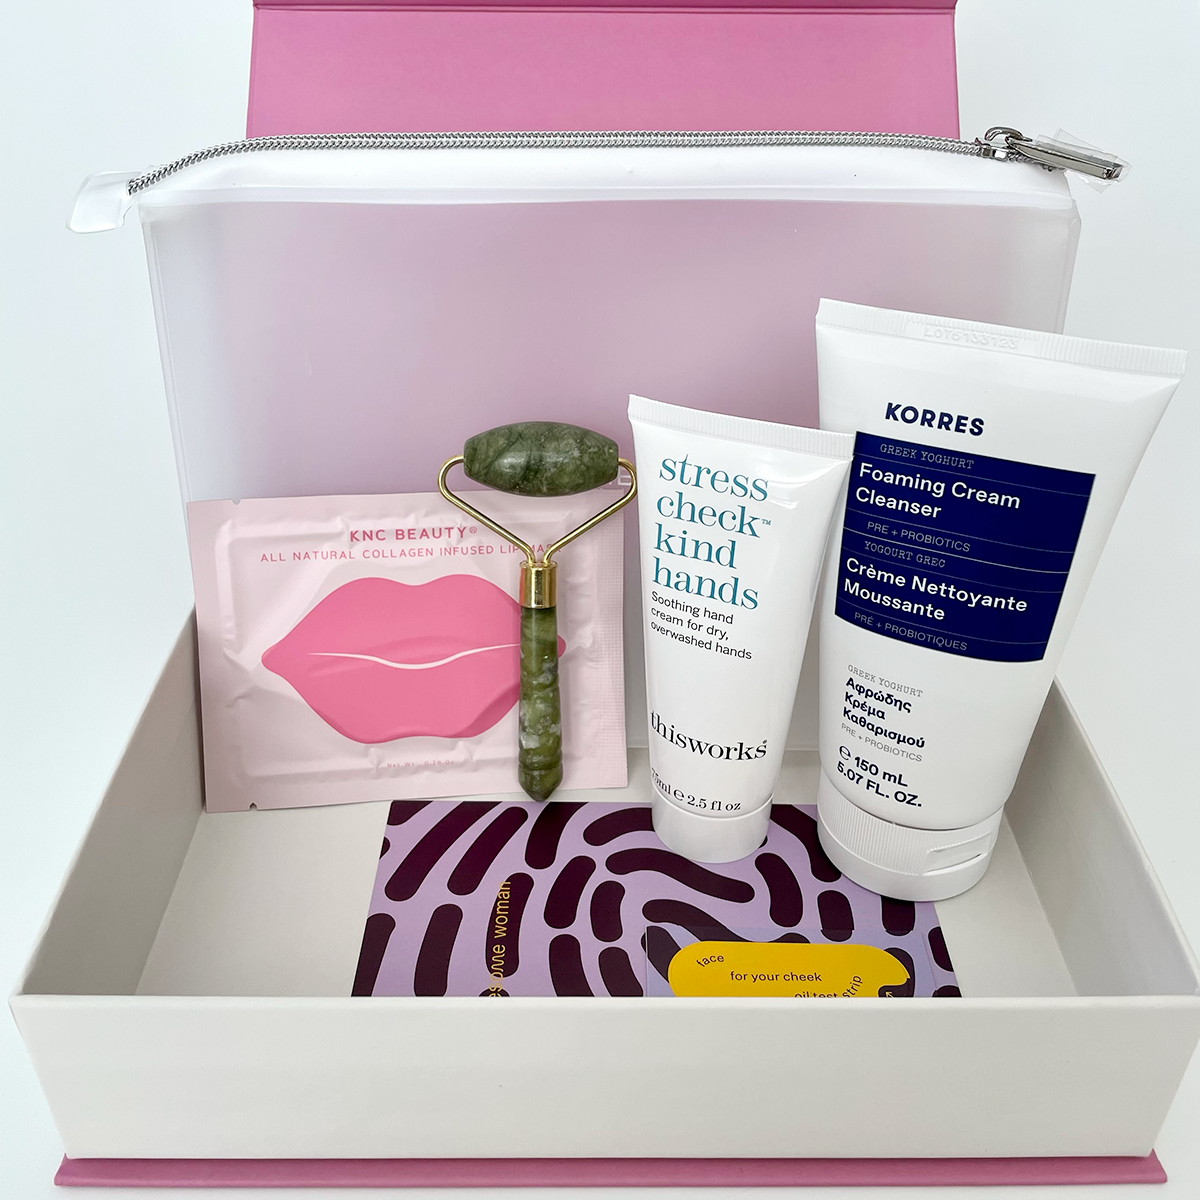 4 beauty products standing upright inside the box